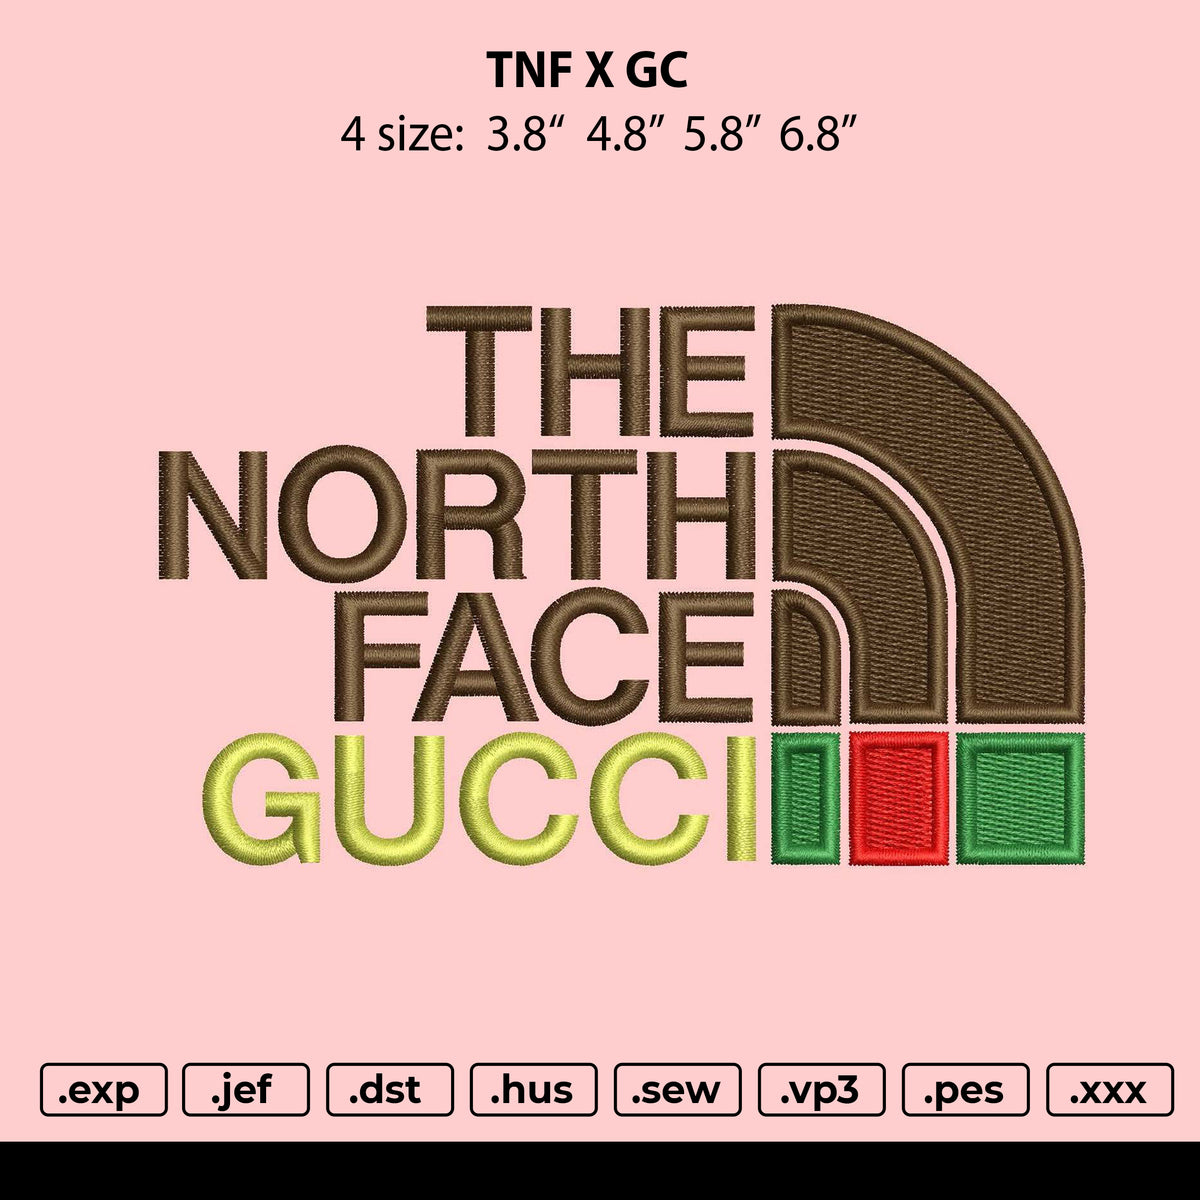 Gucci Pins: The North Face x Gucci Outerwear Collection - GRA